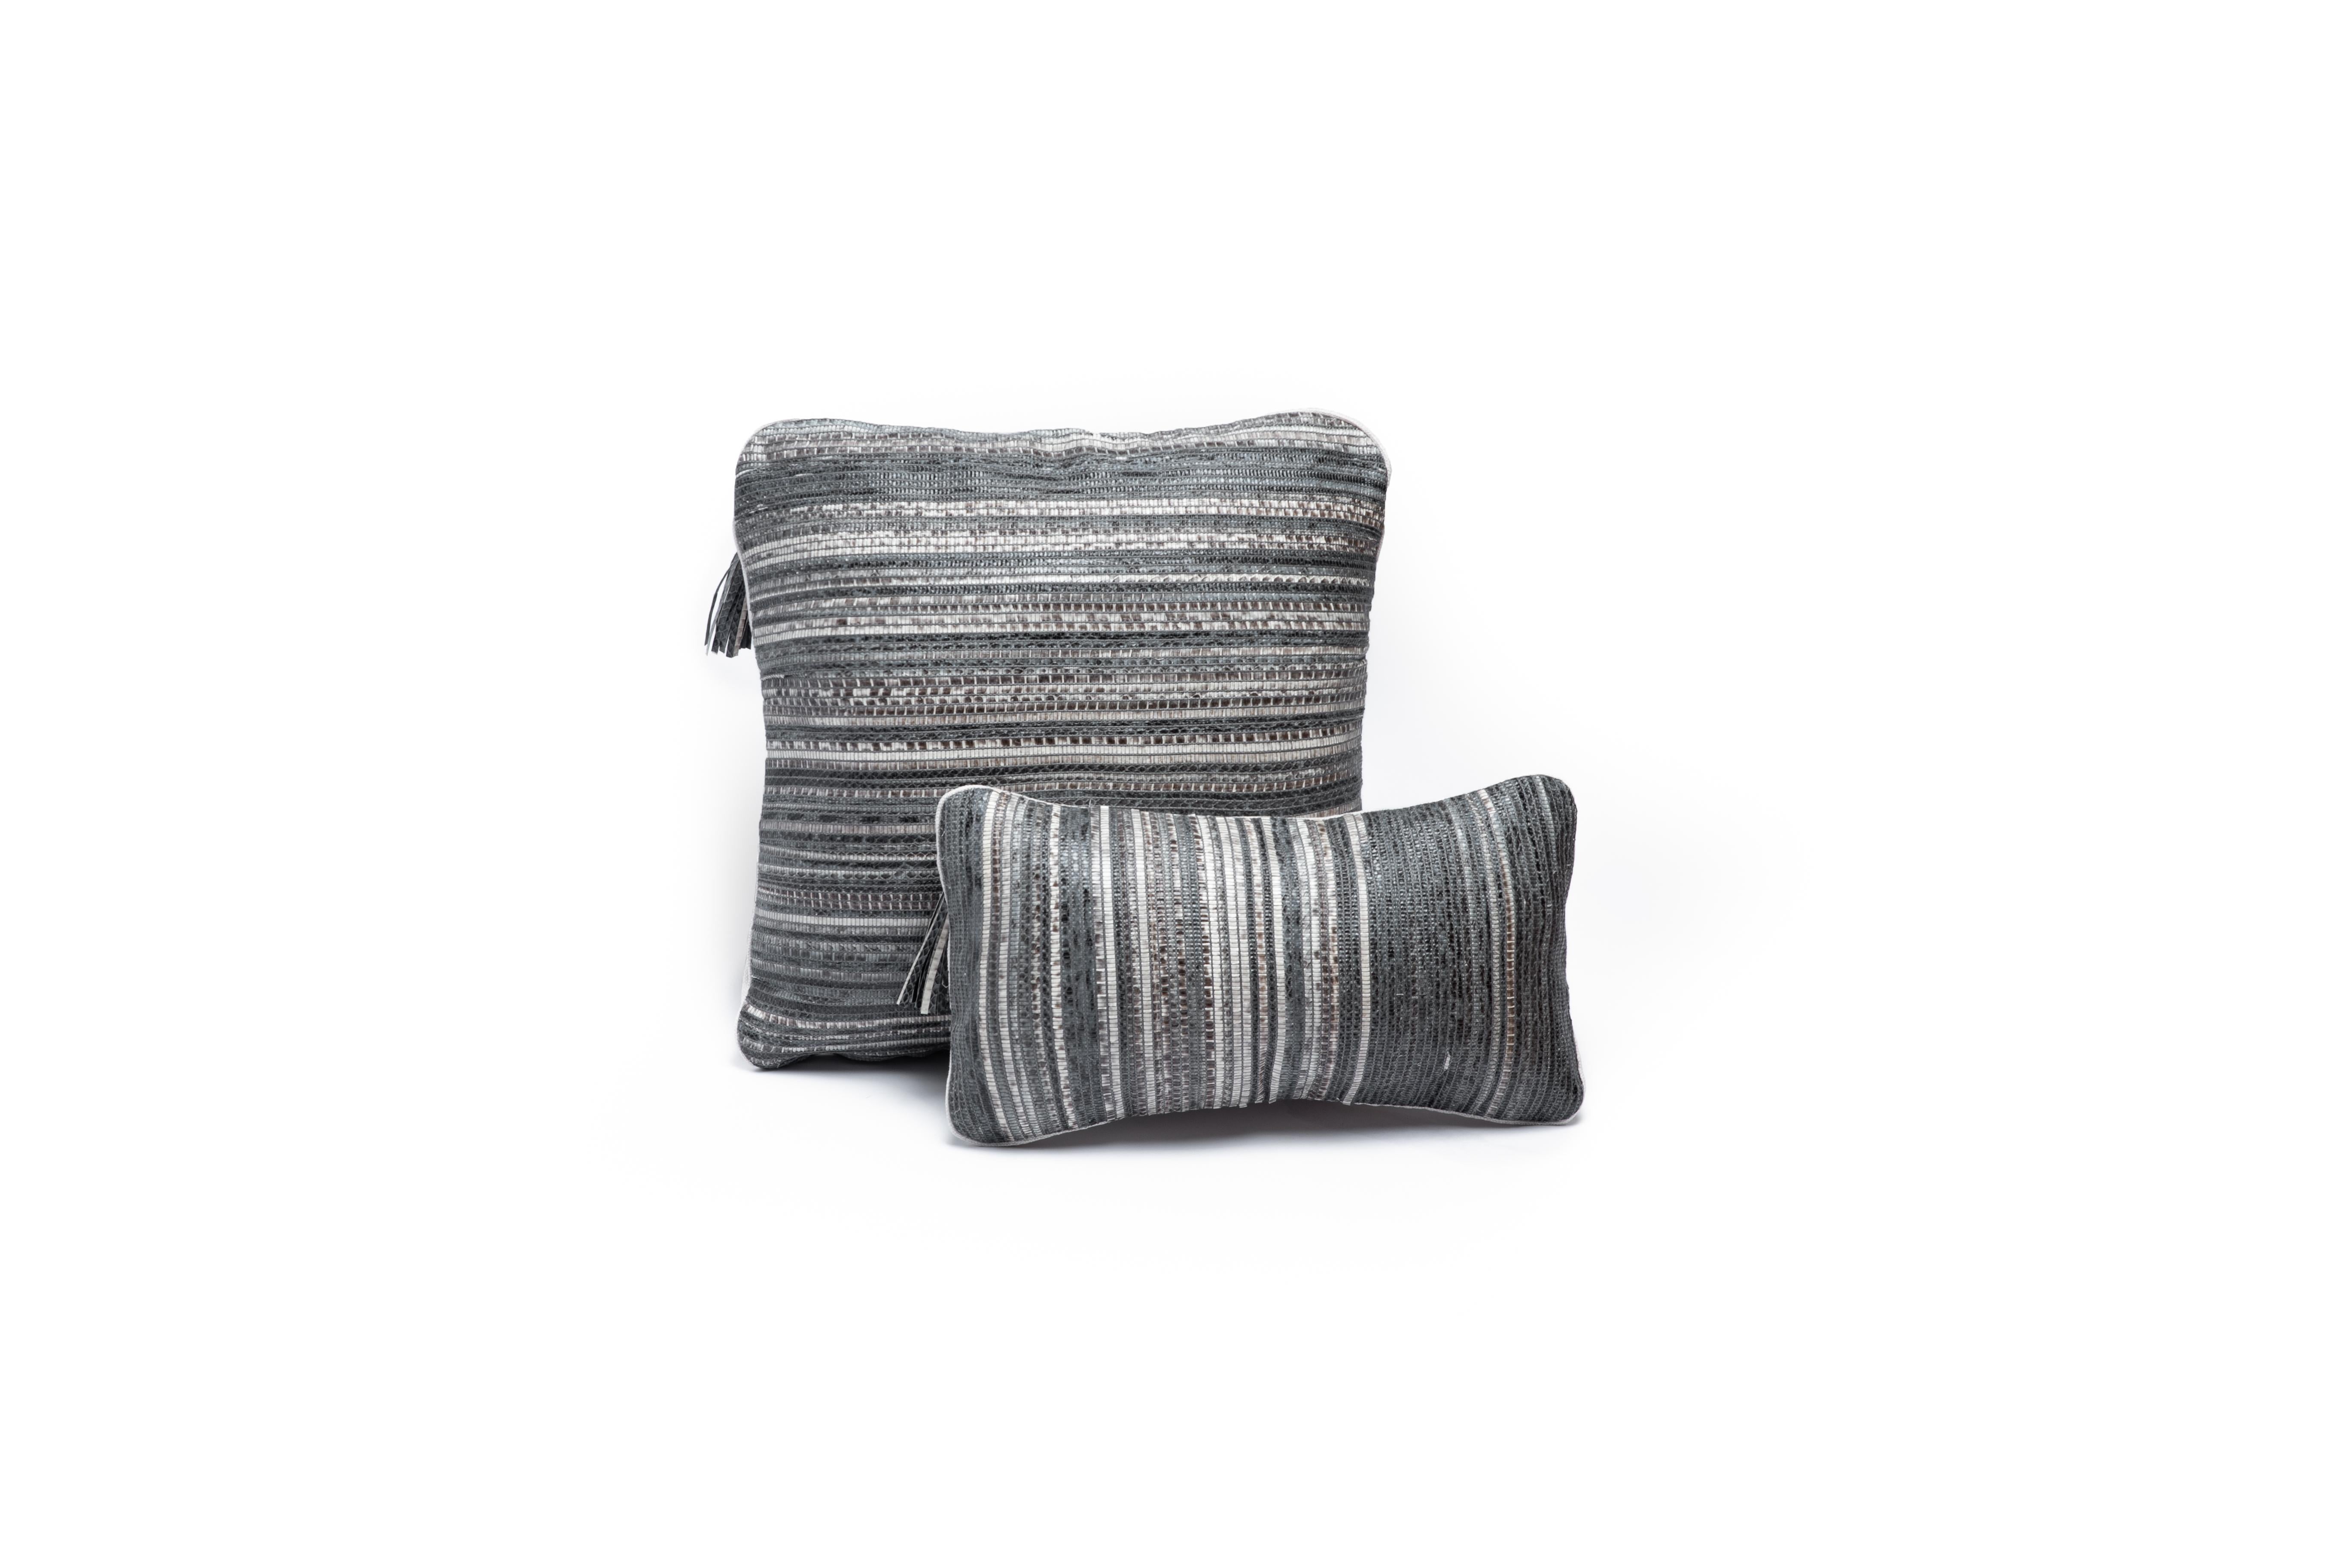 Pillow Set in Woven Snakeskin by Kifu Paris For Sale 2